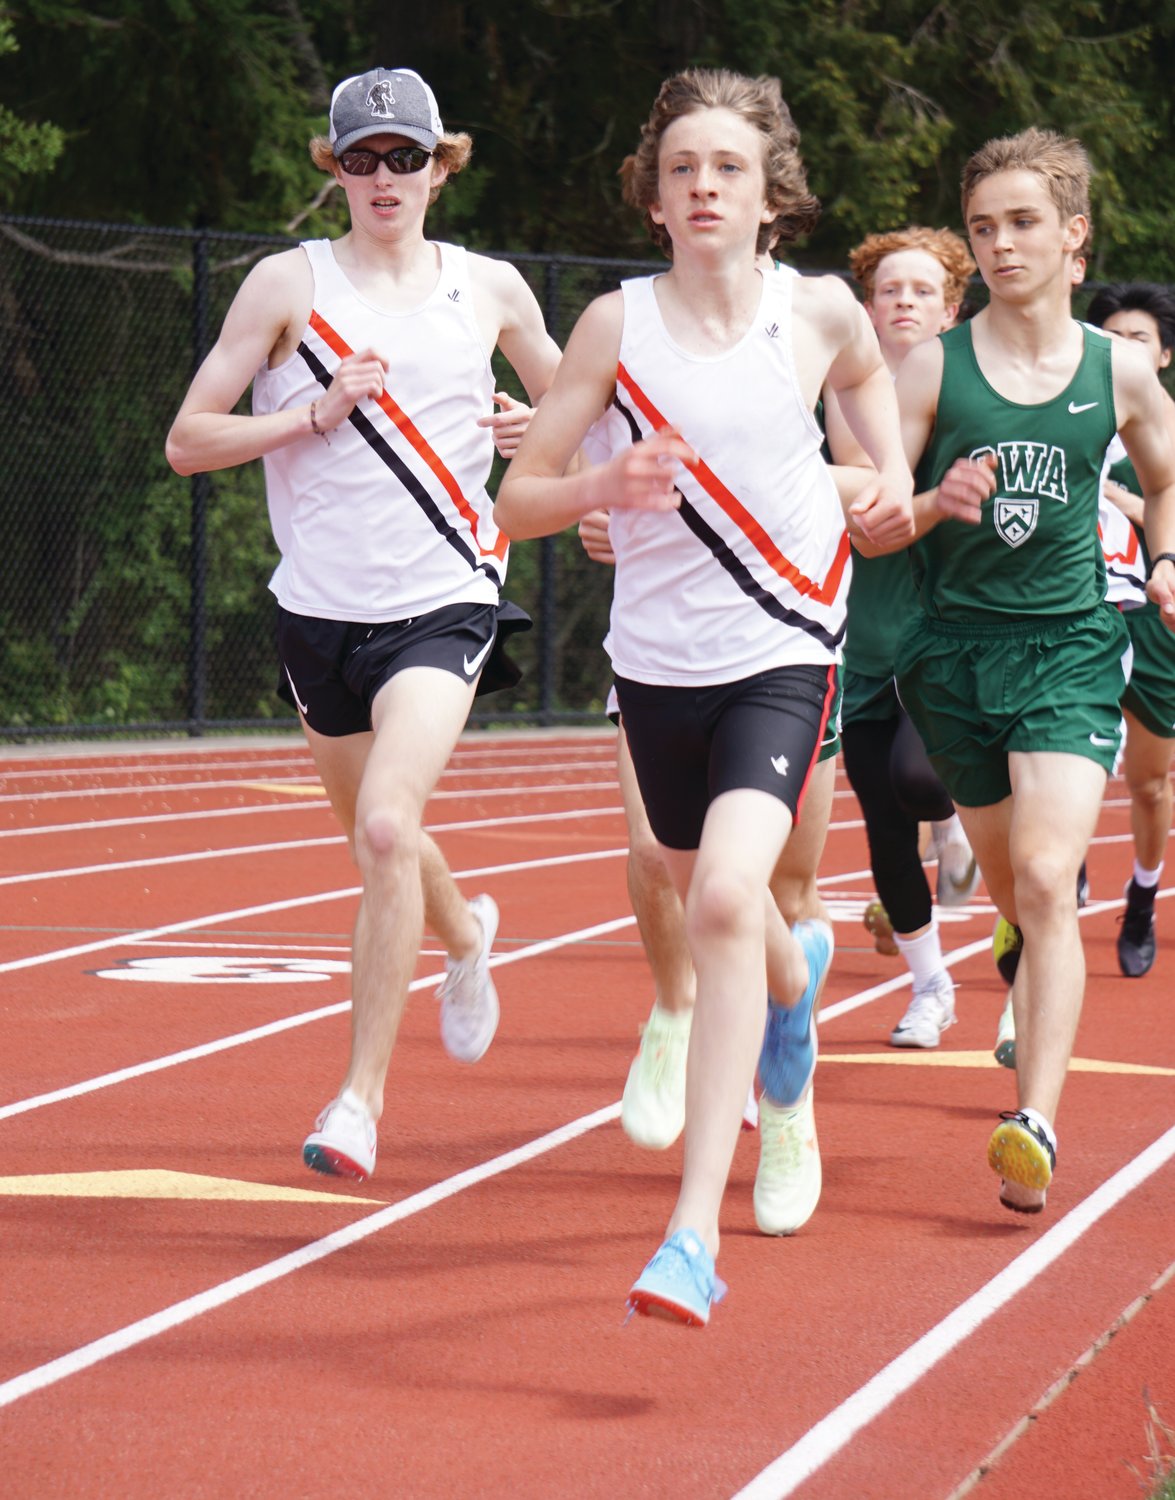 Max Allworth-Miles and Soare Johnston race ahead in the 1600-meter event.